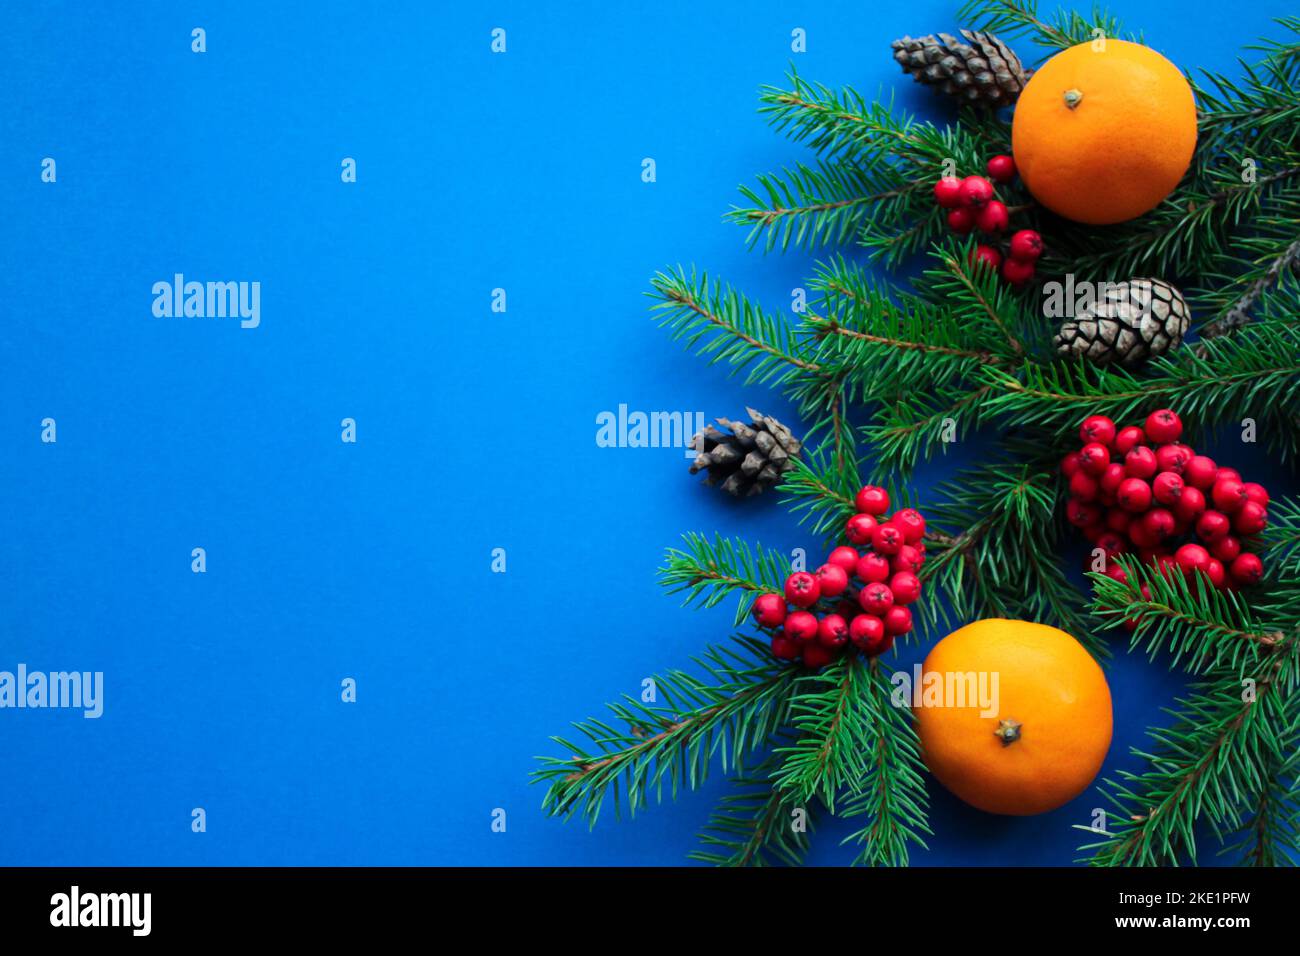 The spirit of Christmas: fir branches, cones, bright red rowan berries and orange tangerines on a bright dark blue background with space for text Stock Photo